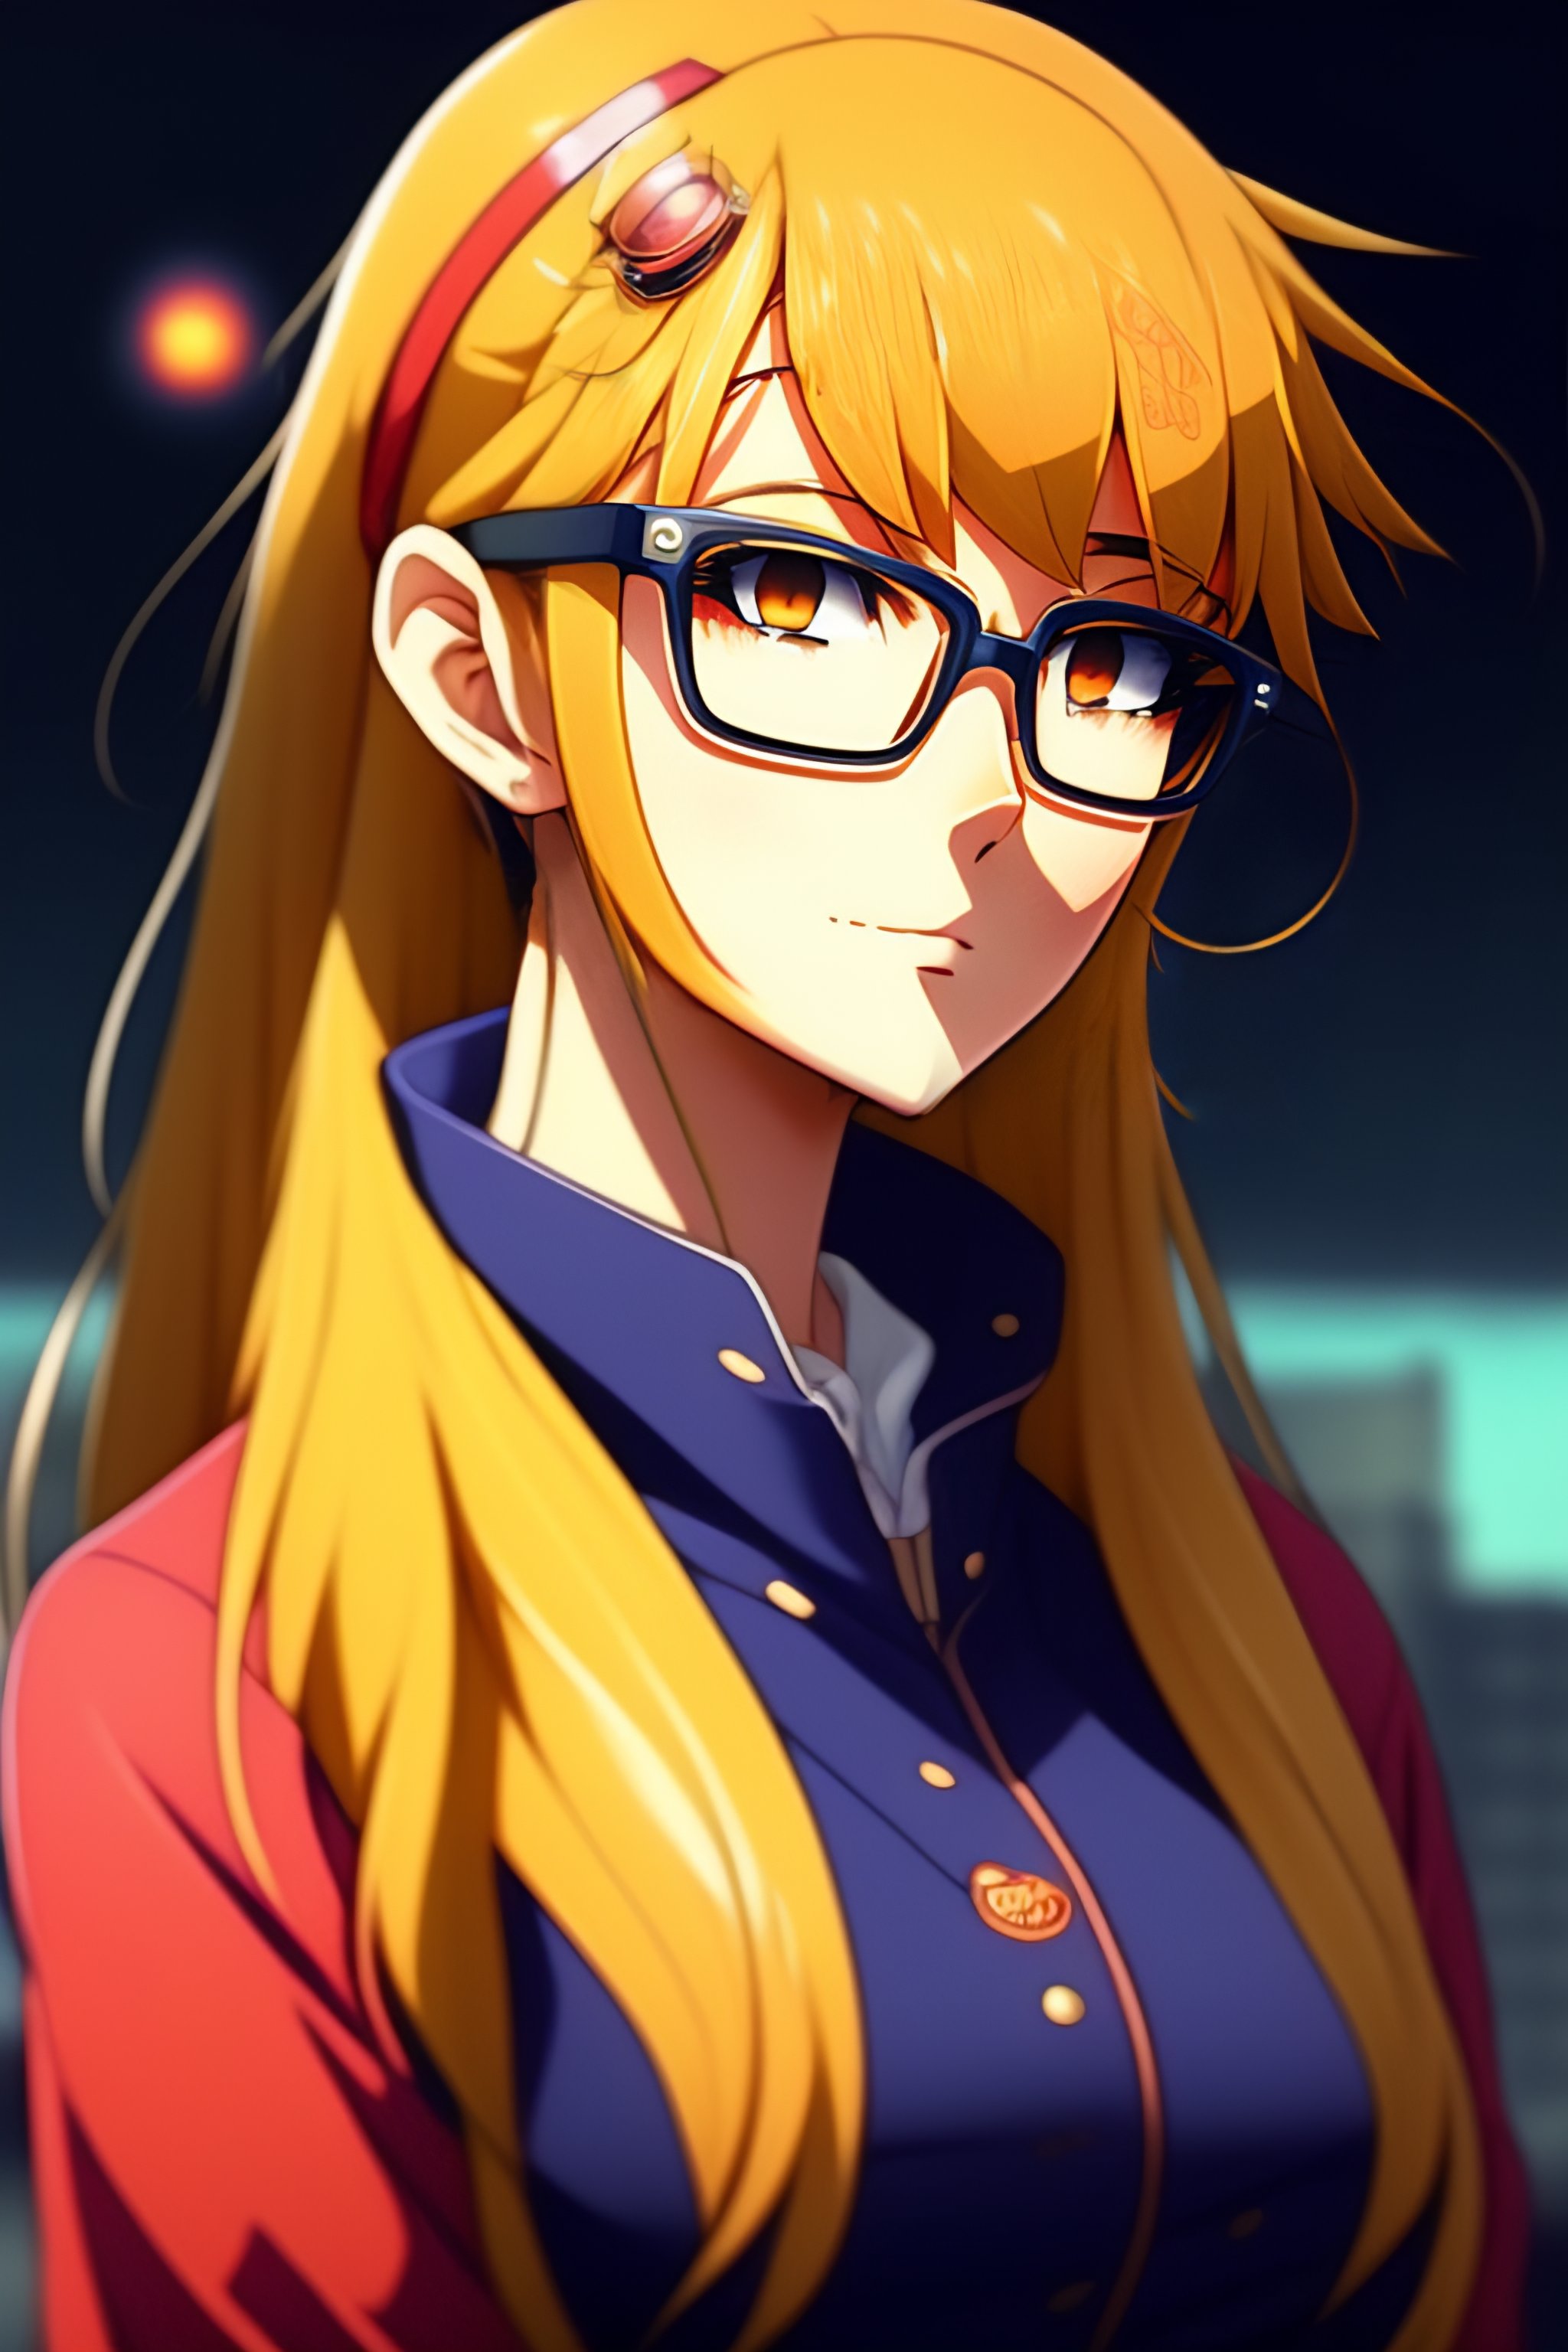 Lexica A Blonde Girl With Glasses Leaning Forward Anime Style Anime Japanese Street Evangelion 8731